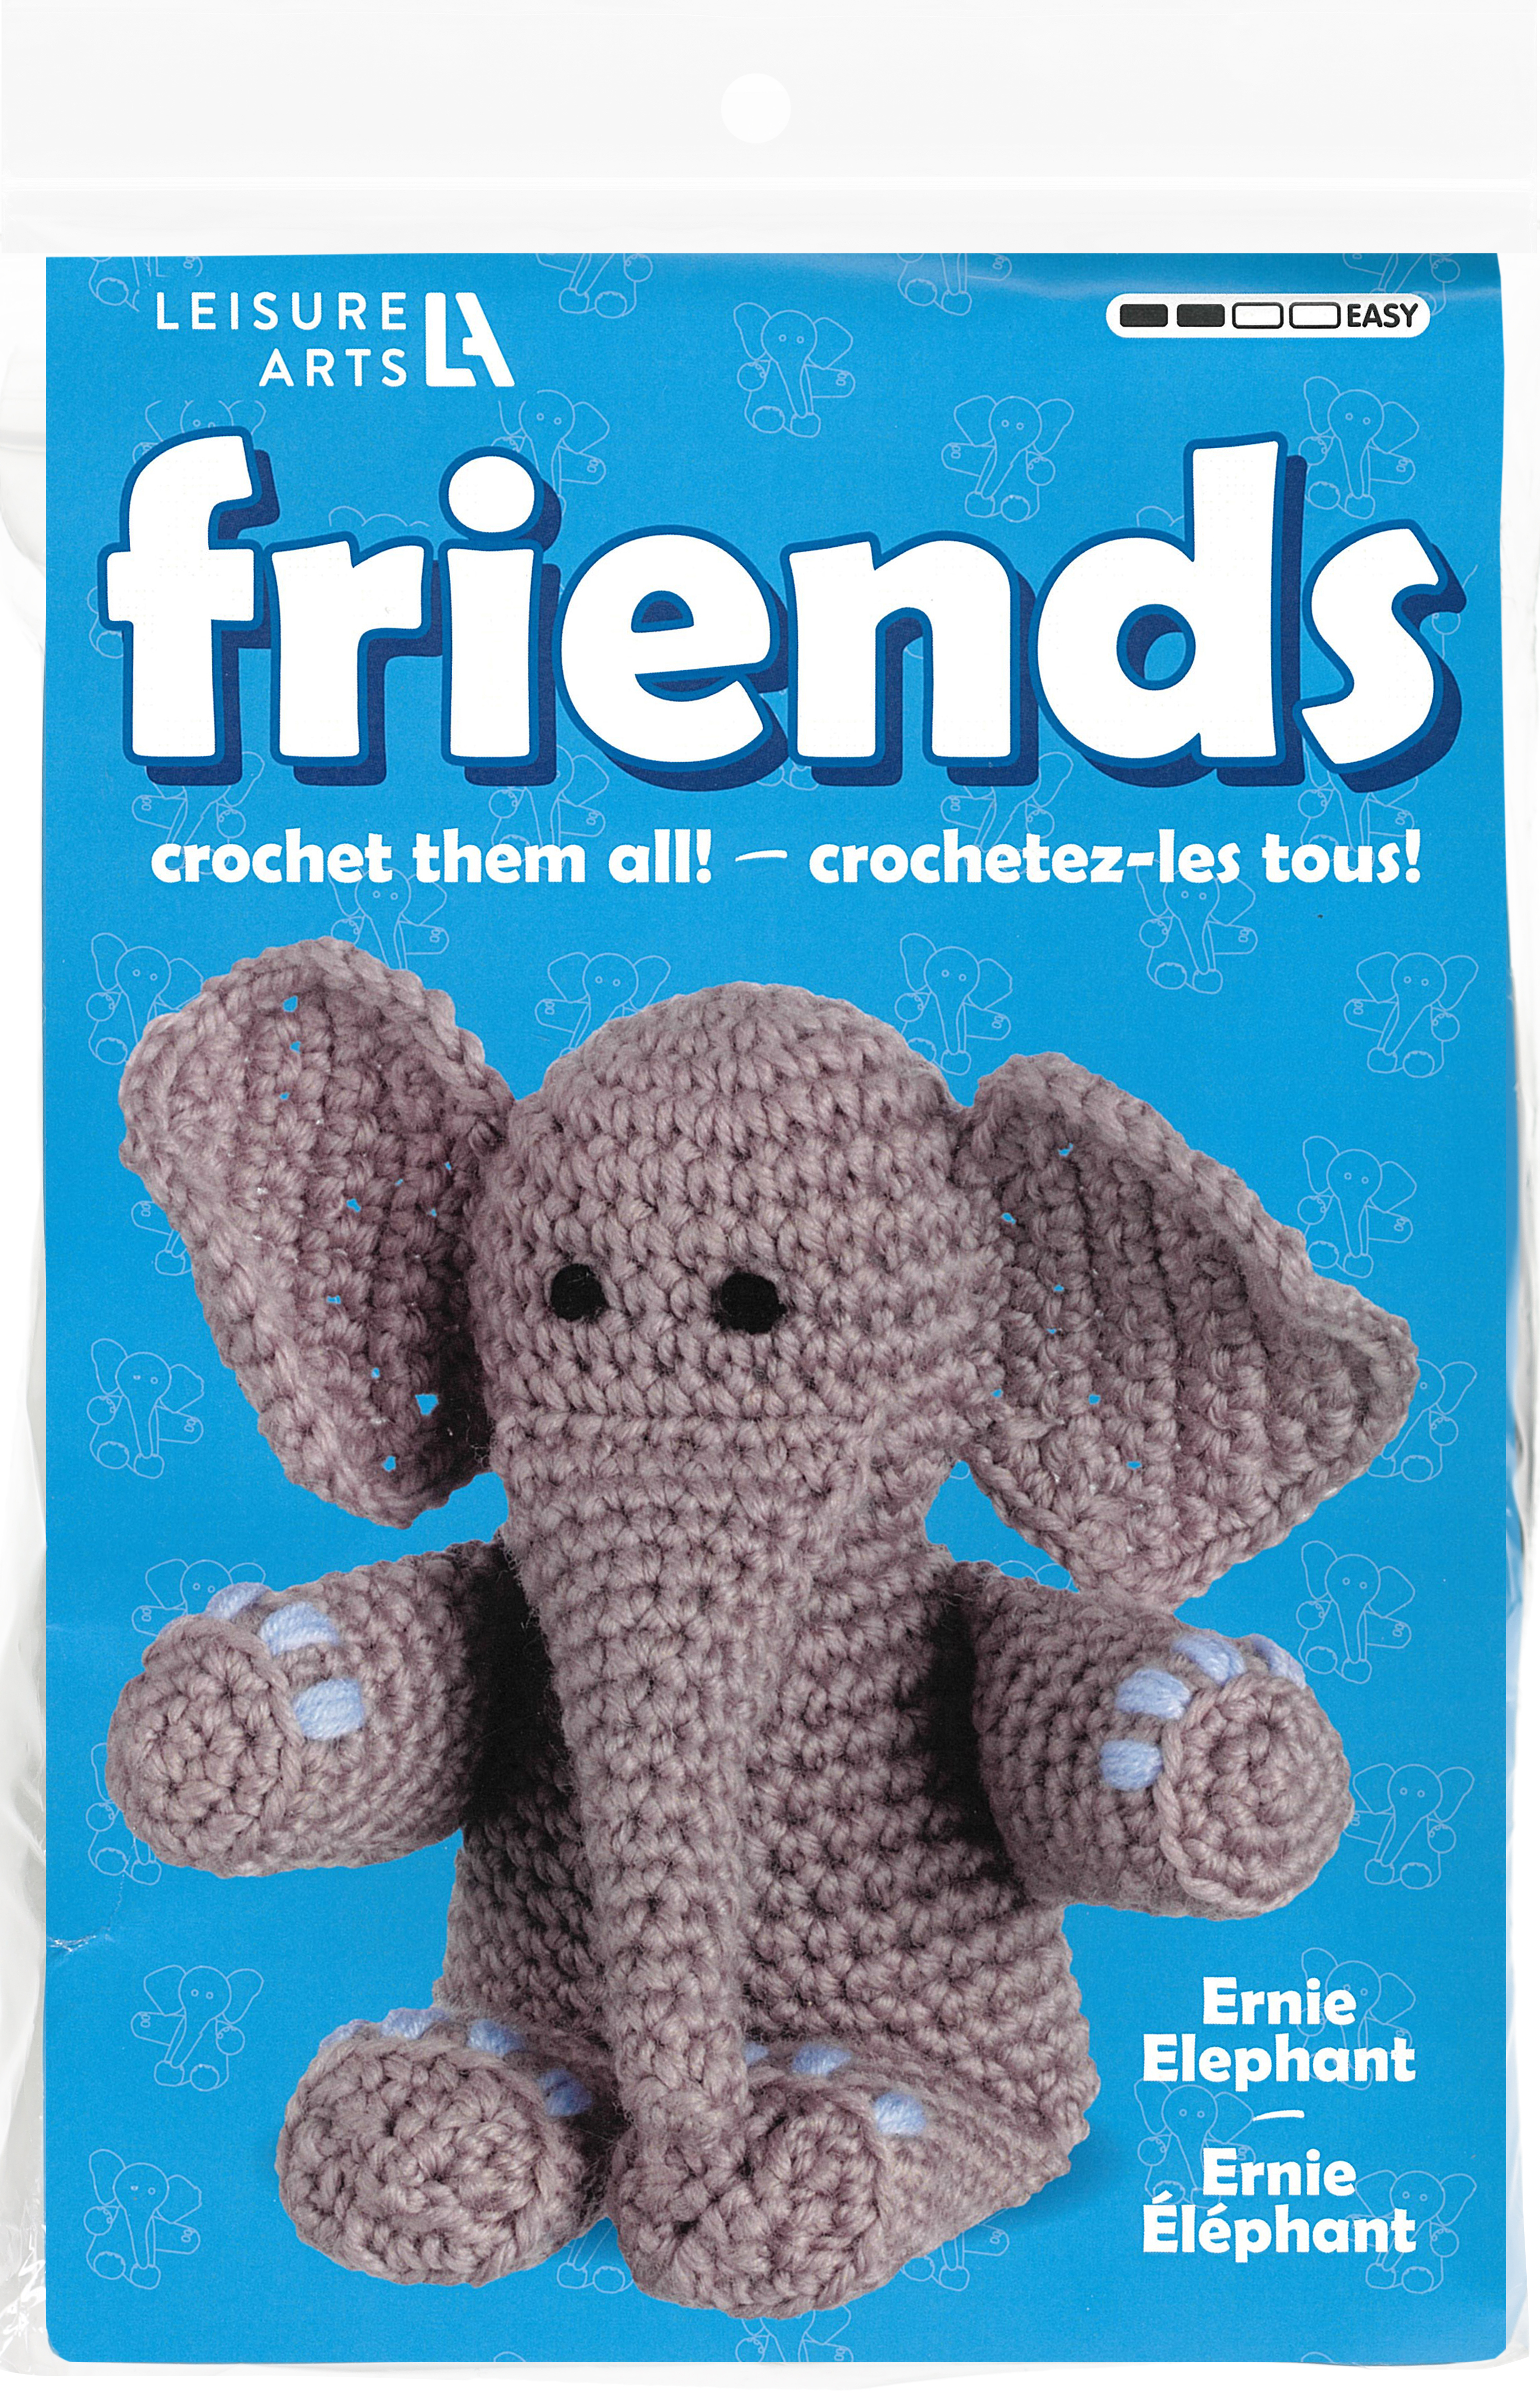 Leisure Arts Little Crochet Friend Animals Crochet Kit, Pig, 8, Complete  Crochet kit, Learn to Crochet Animal Starter kit for All Ages, Includes